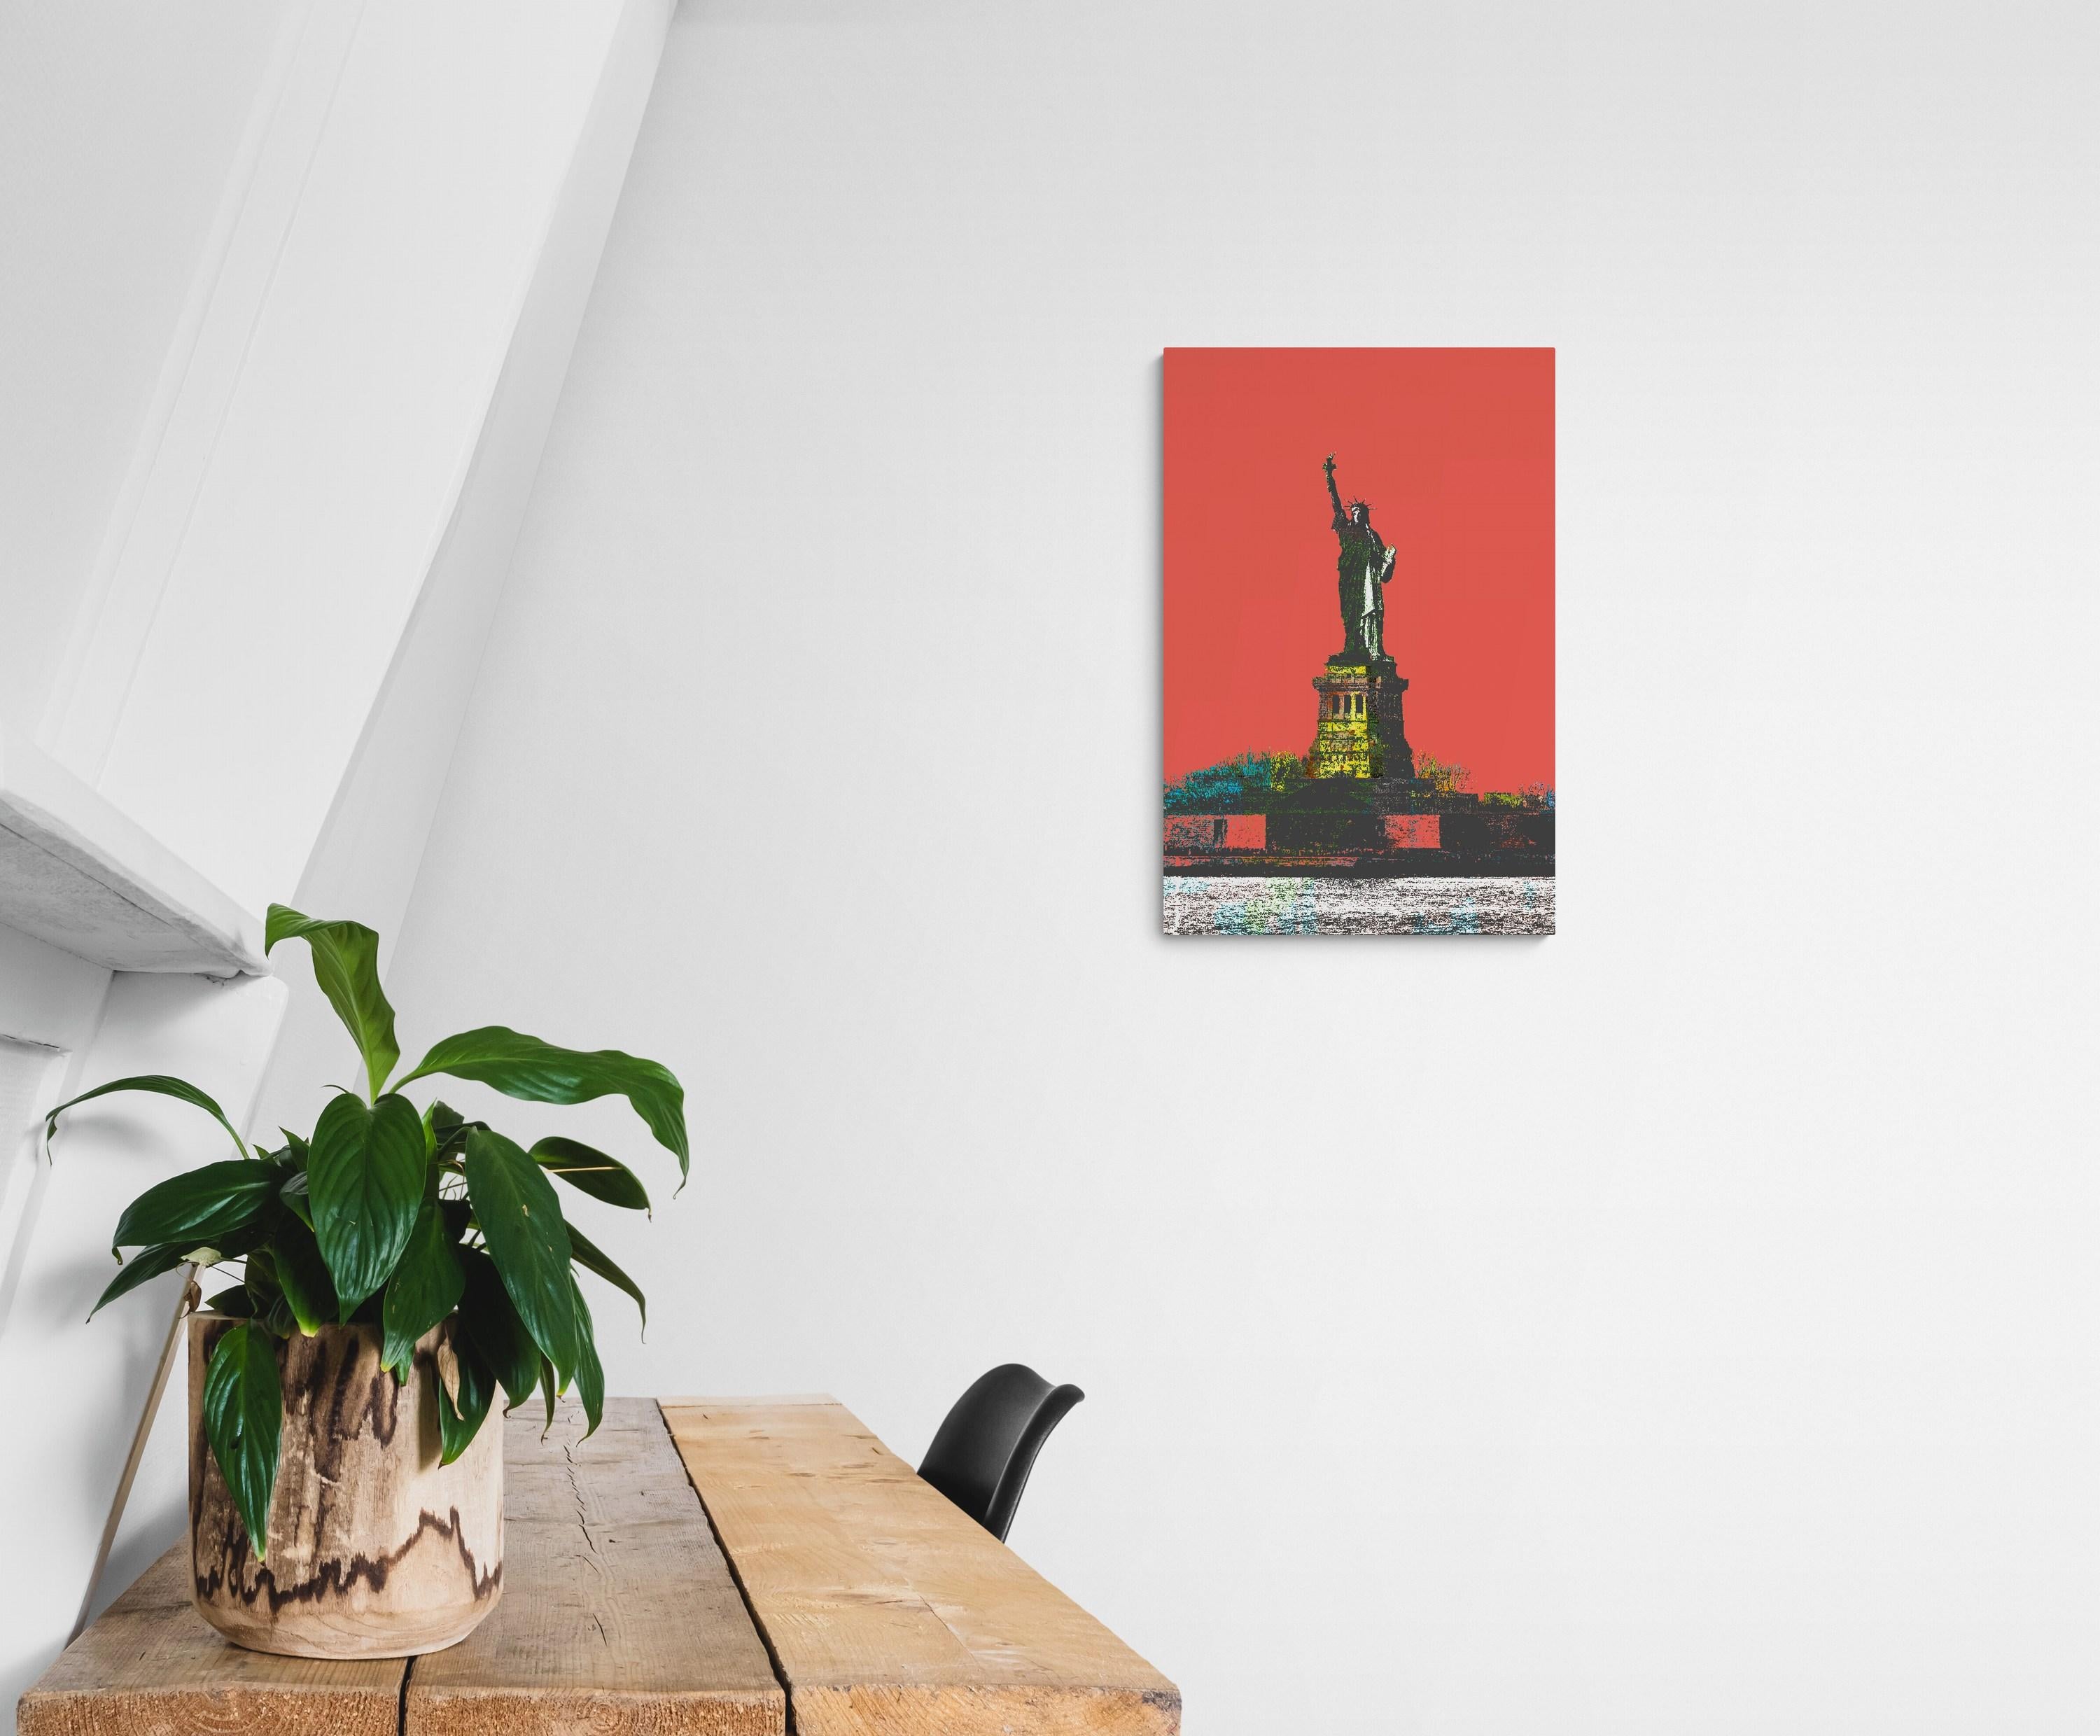 Katrina Revenaugh
“I Heart NY No. 2”
Dye Sublimation Print on Aluminum, 2024
Size Options: 12 x 18 inches, 24 x 36 inches
Color Options: Blue, Coral, Green
Edition: 75 + AP
Signed and titled on label provided separately
COA included

Tags: